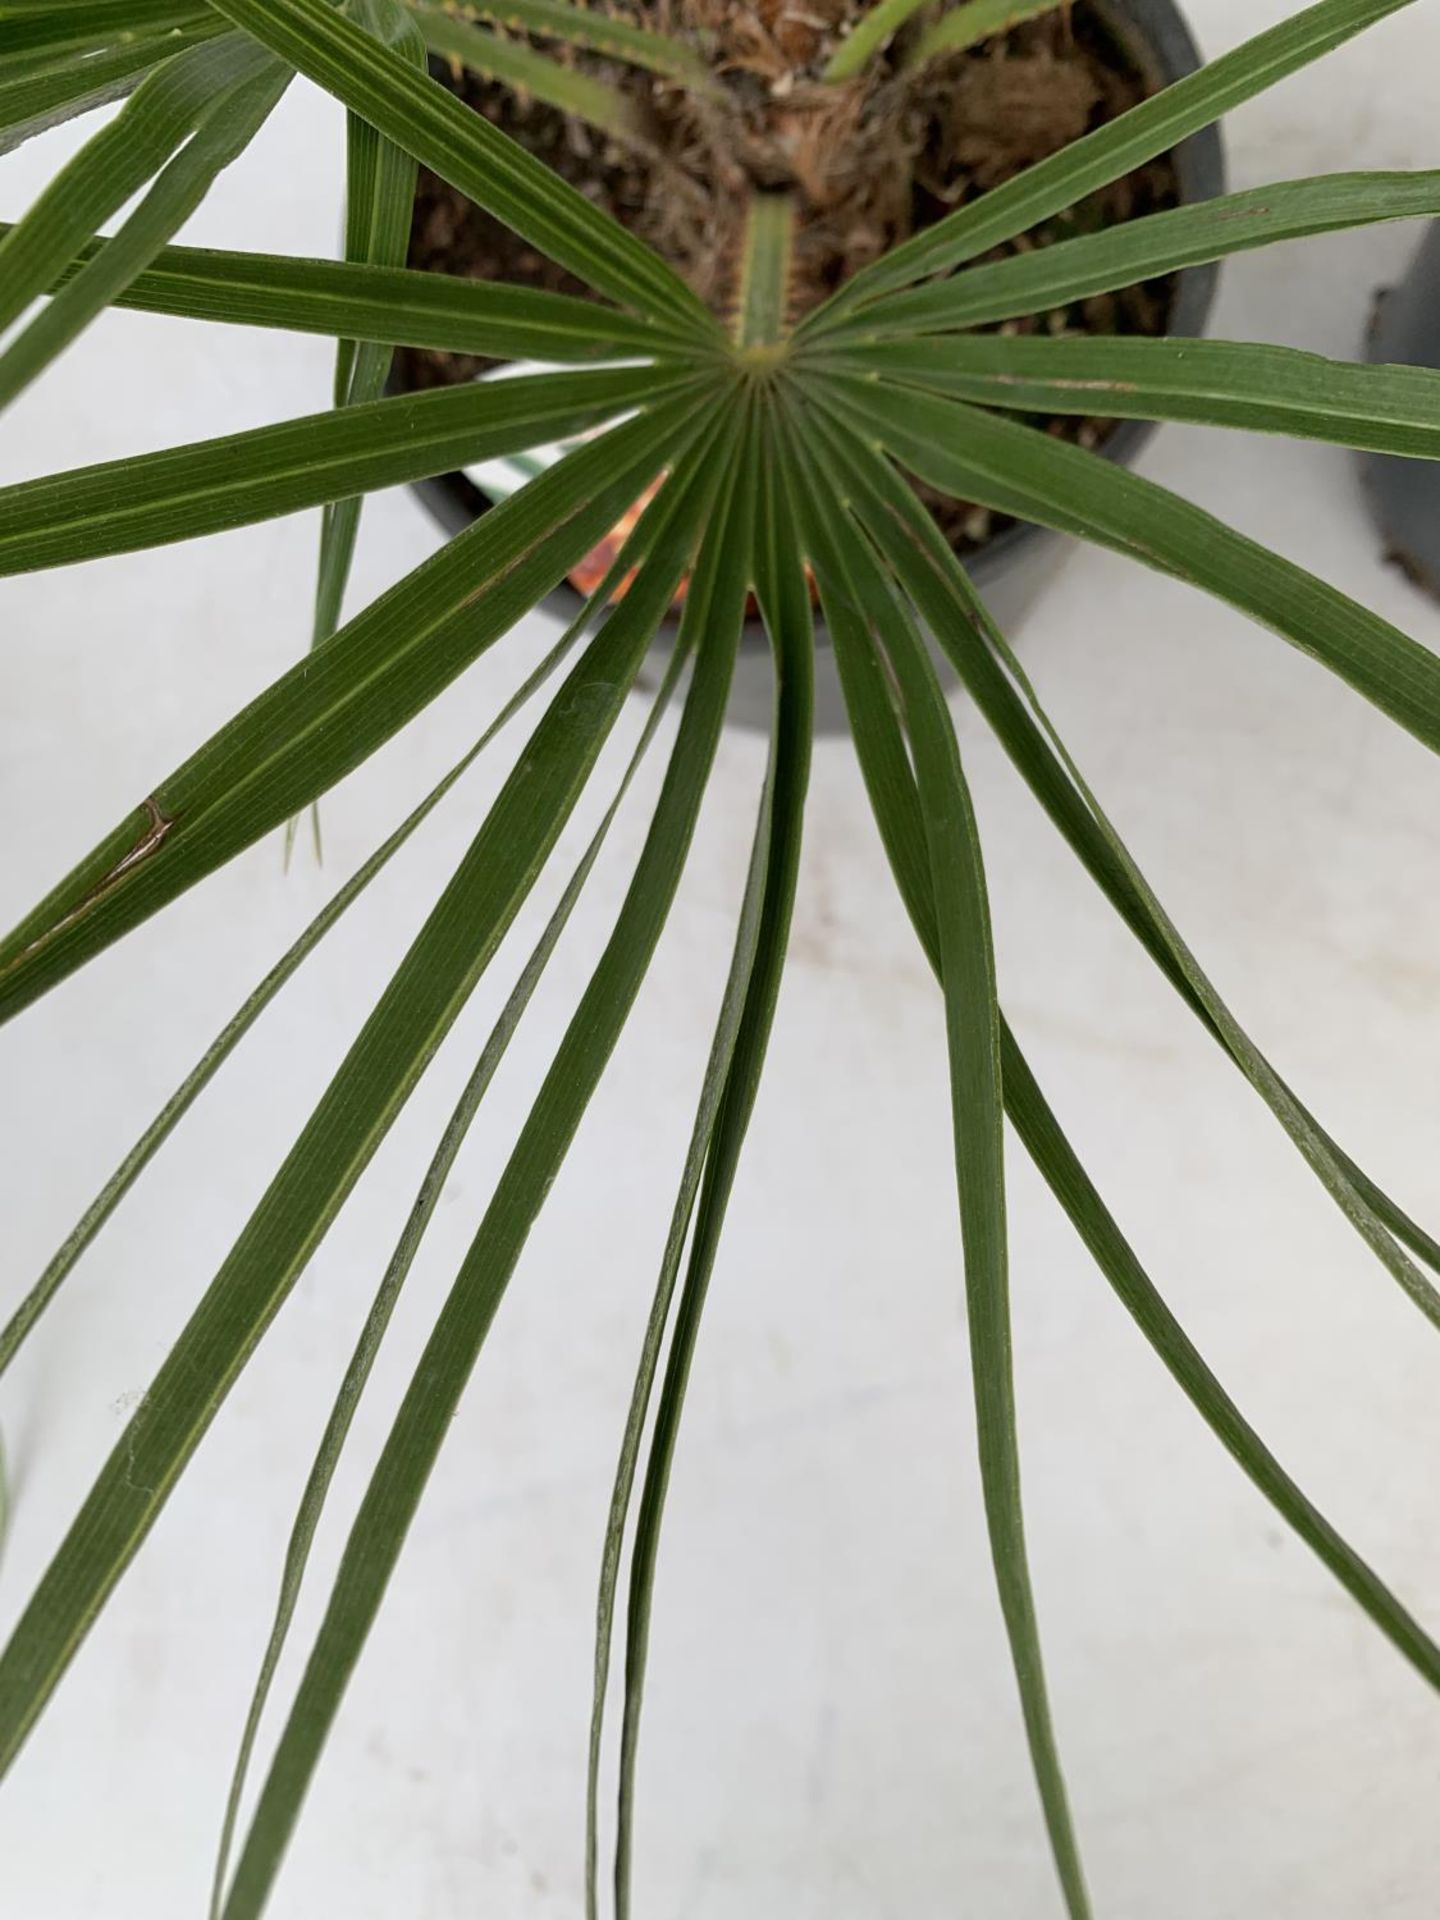 TWO CHAMAEROPS HUMILIS HARDY IN 3 LTR POTS APPROX 70CM IN HEIGHT PLUS VAT TO BE SOLD FOR THE TWO - Image 9 of 10